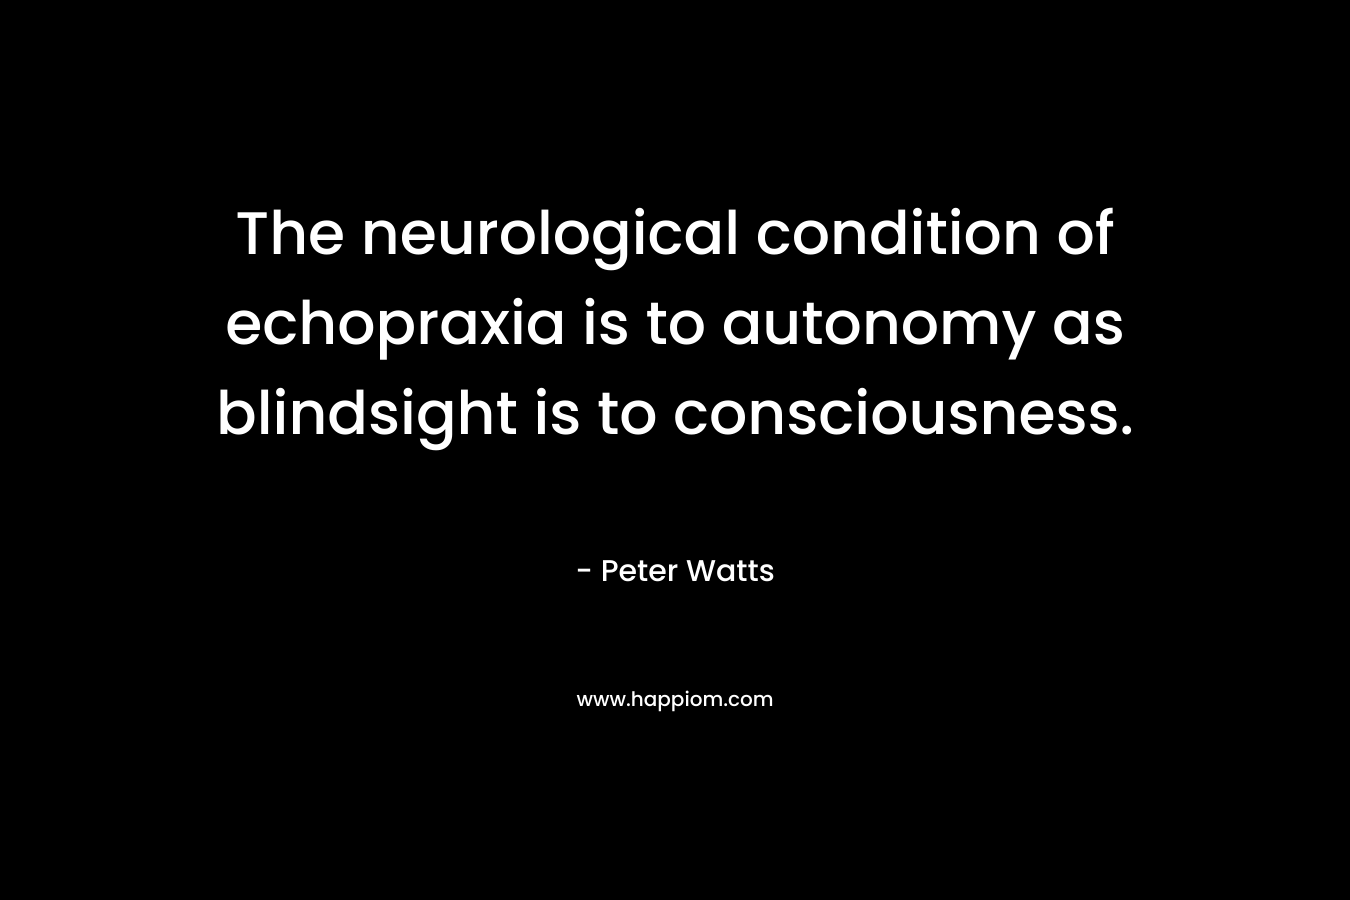 The neurological condition of echopraxia is to autonomy as blindsight is to consciousness.